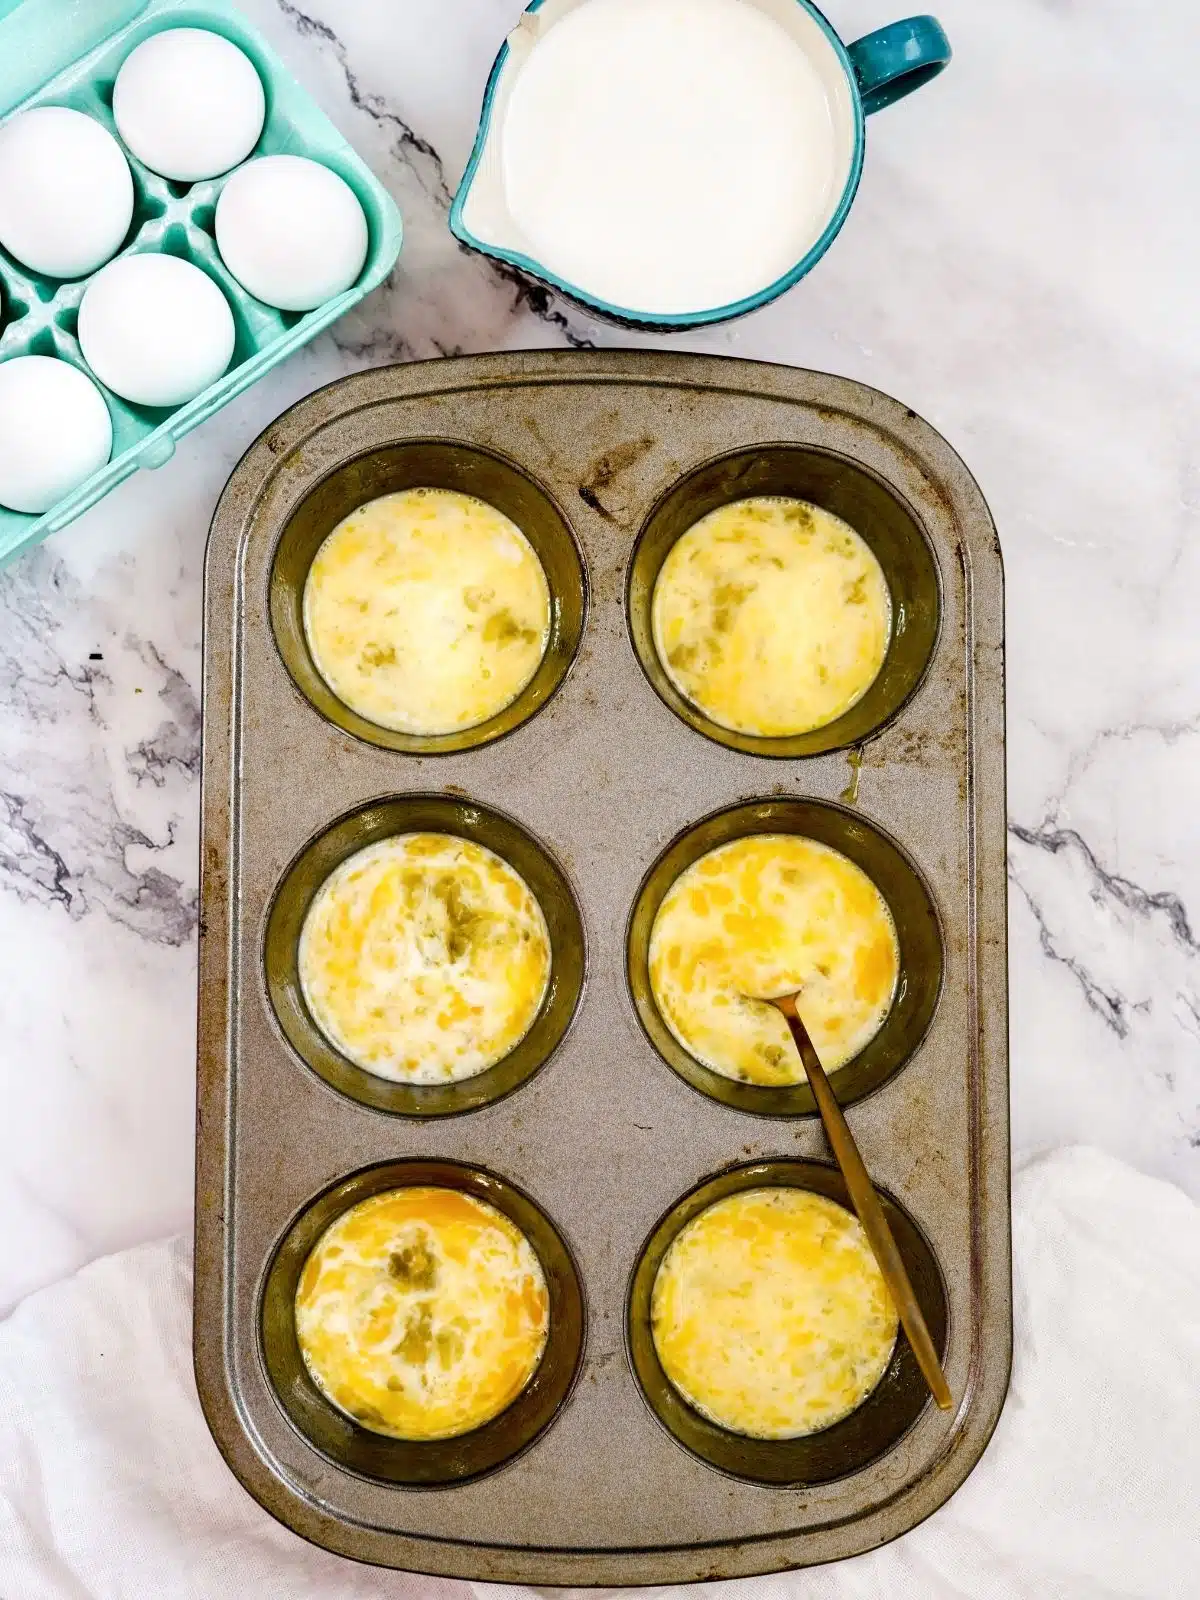 Add raw eggs to muffin pan.